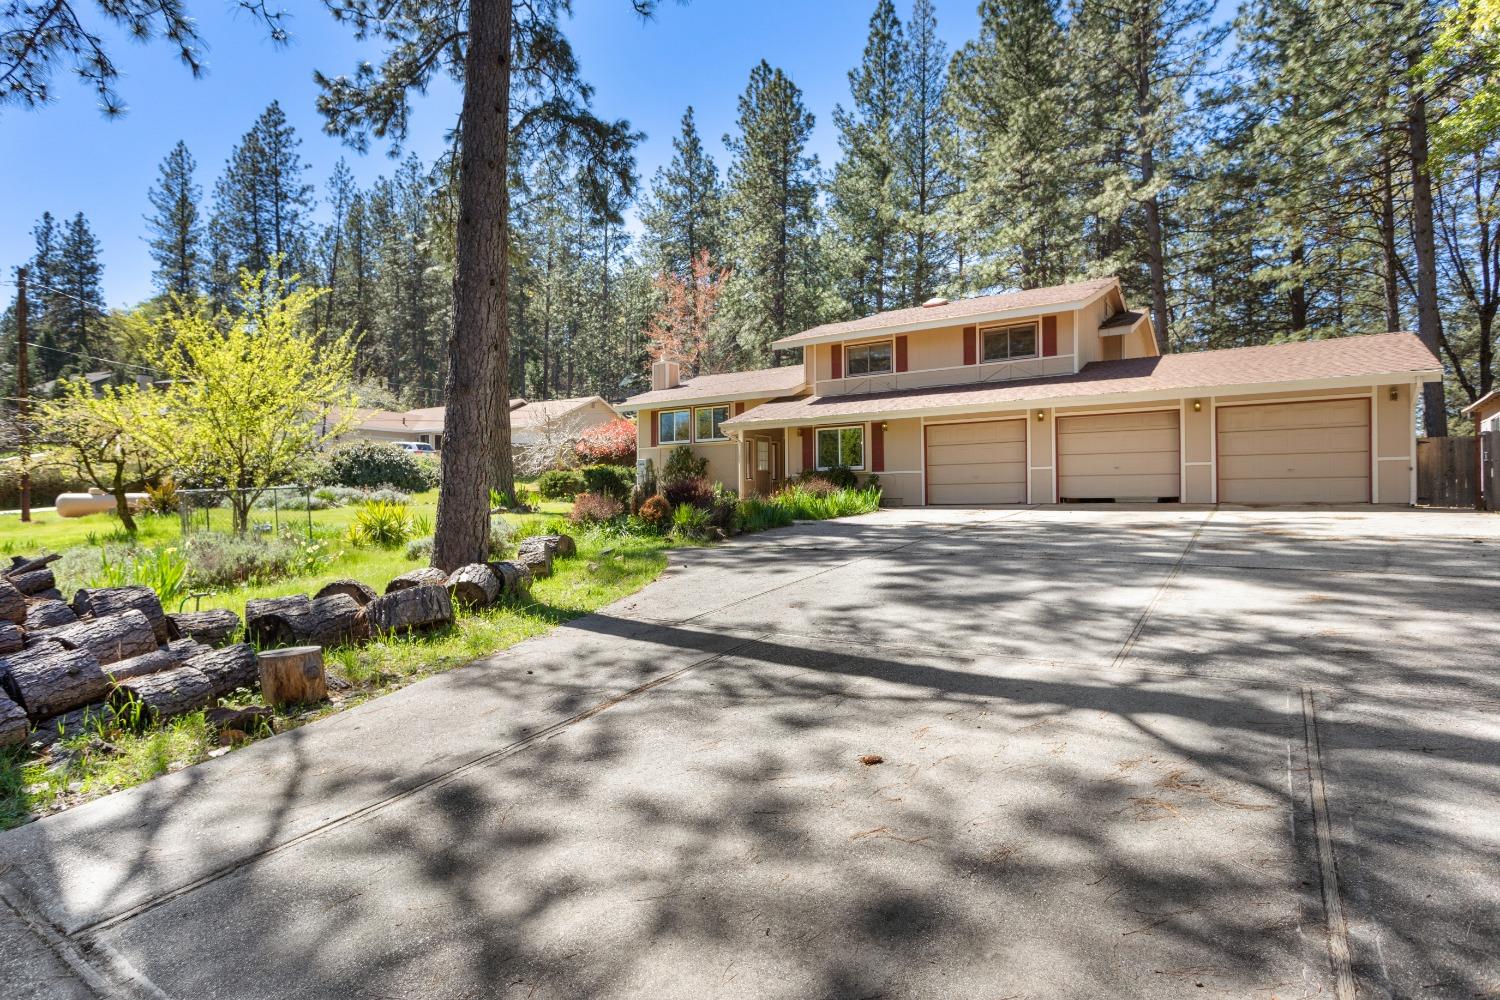 Photo of 17662 Alexandra Wy in Grass Valley, CA